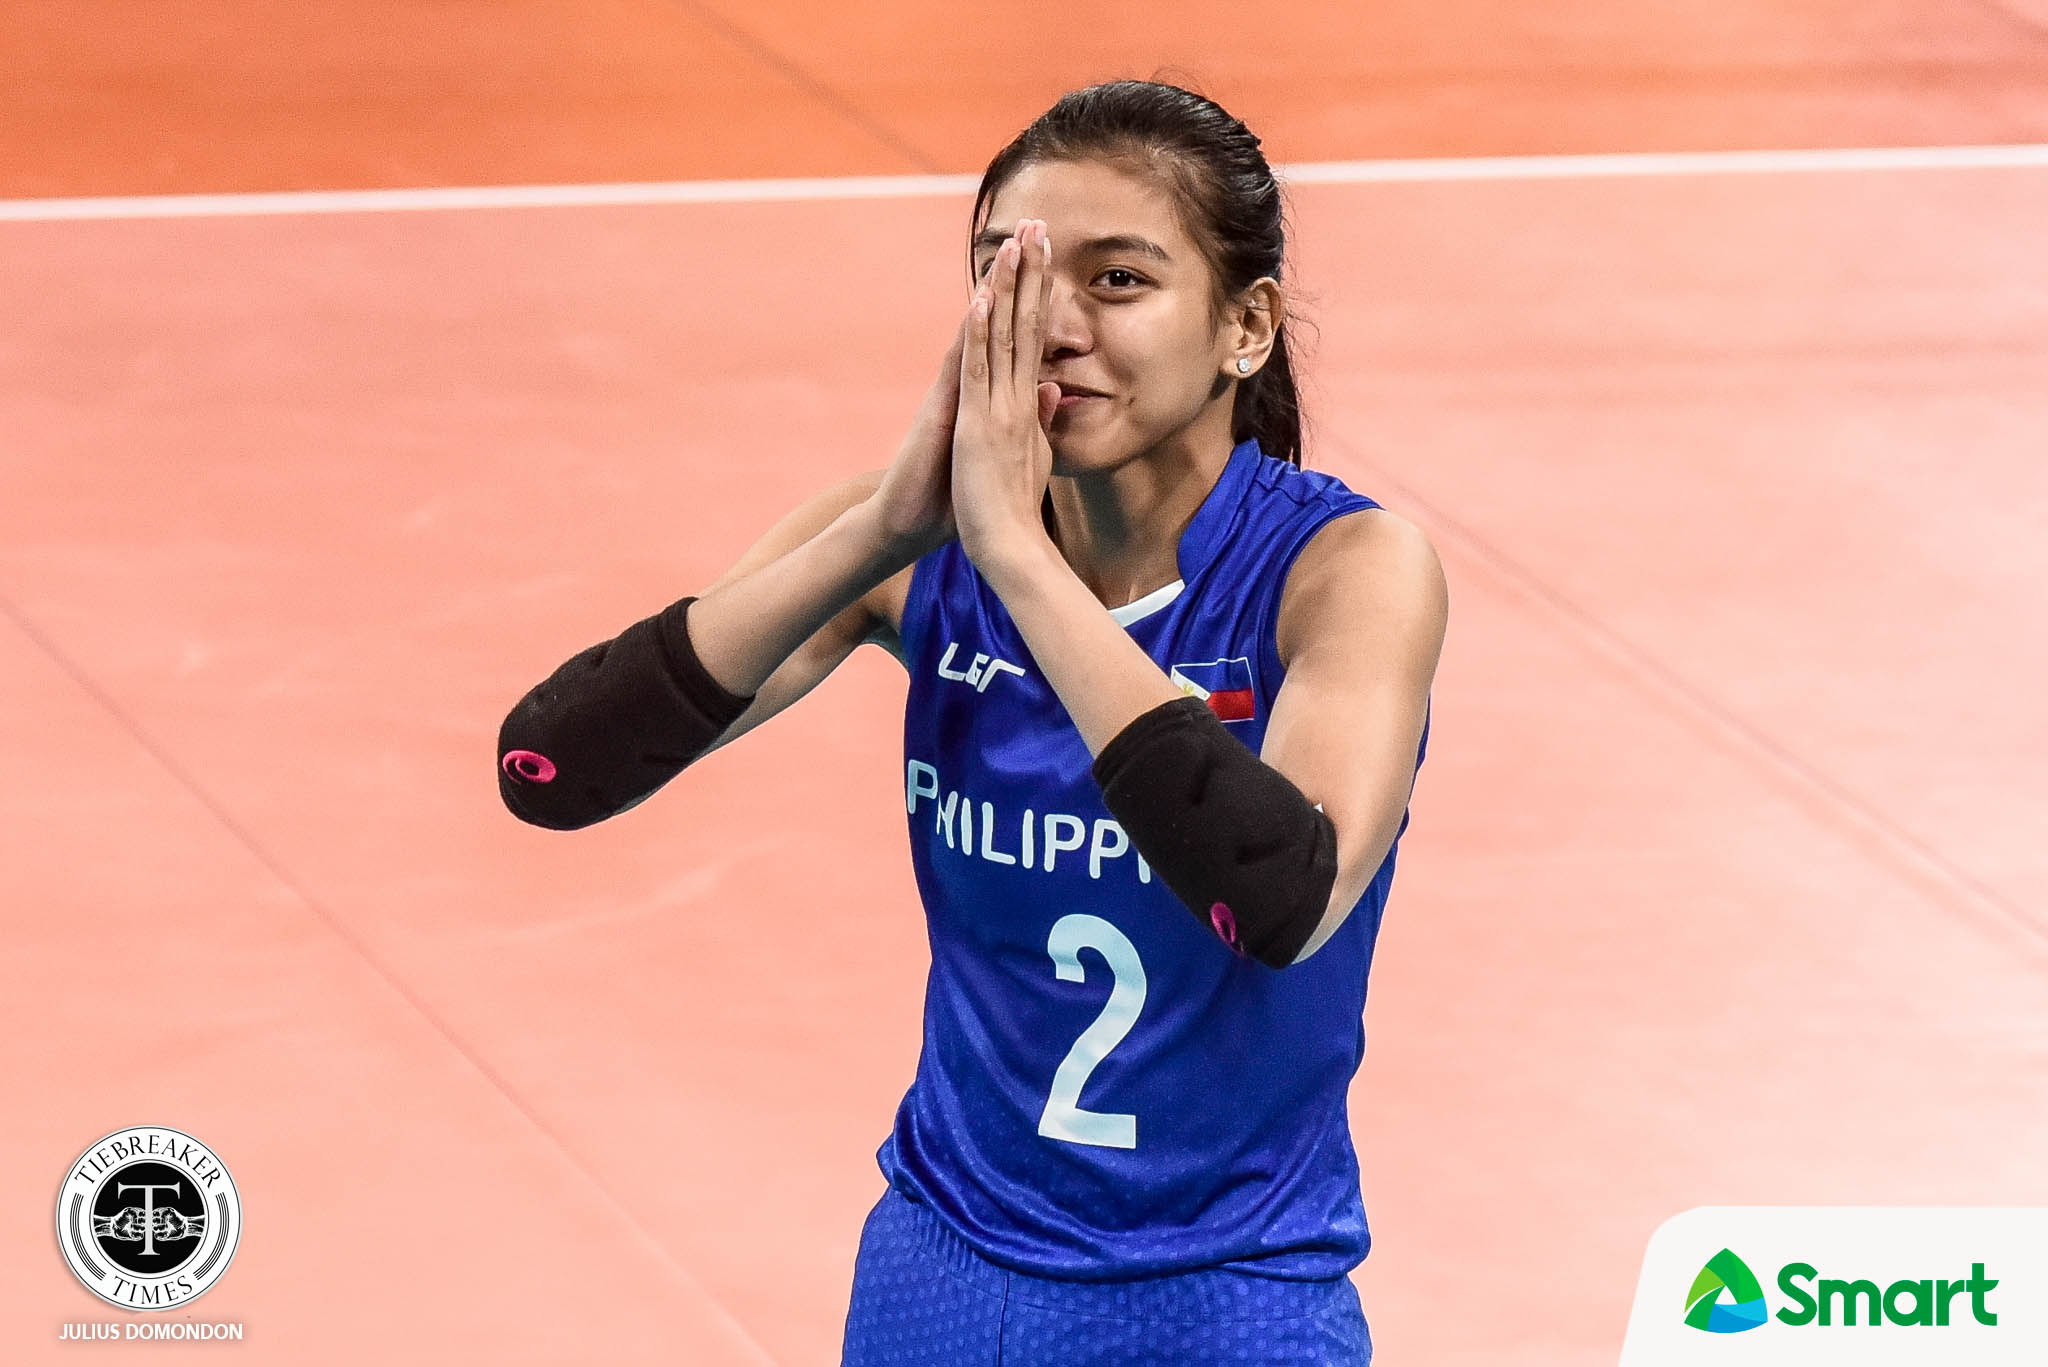 2019-sea-games-volleyball-indonesia-def-philippines-alyssa-valdez Valdez excited for Creamline youngsters as they finally get to rep PH 2022 AVC Cup for Women News PVL Volleyball  - philippine sports news